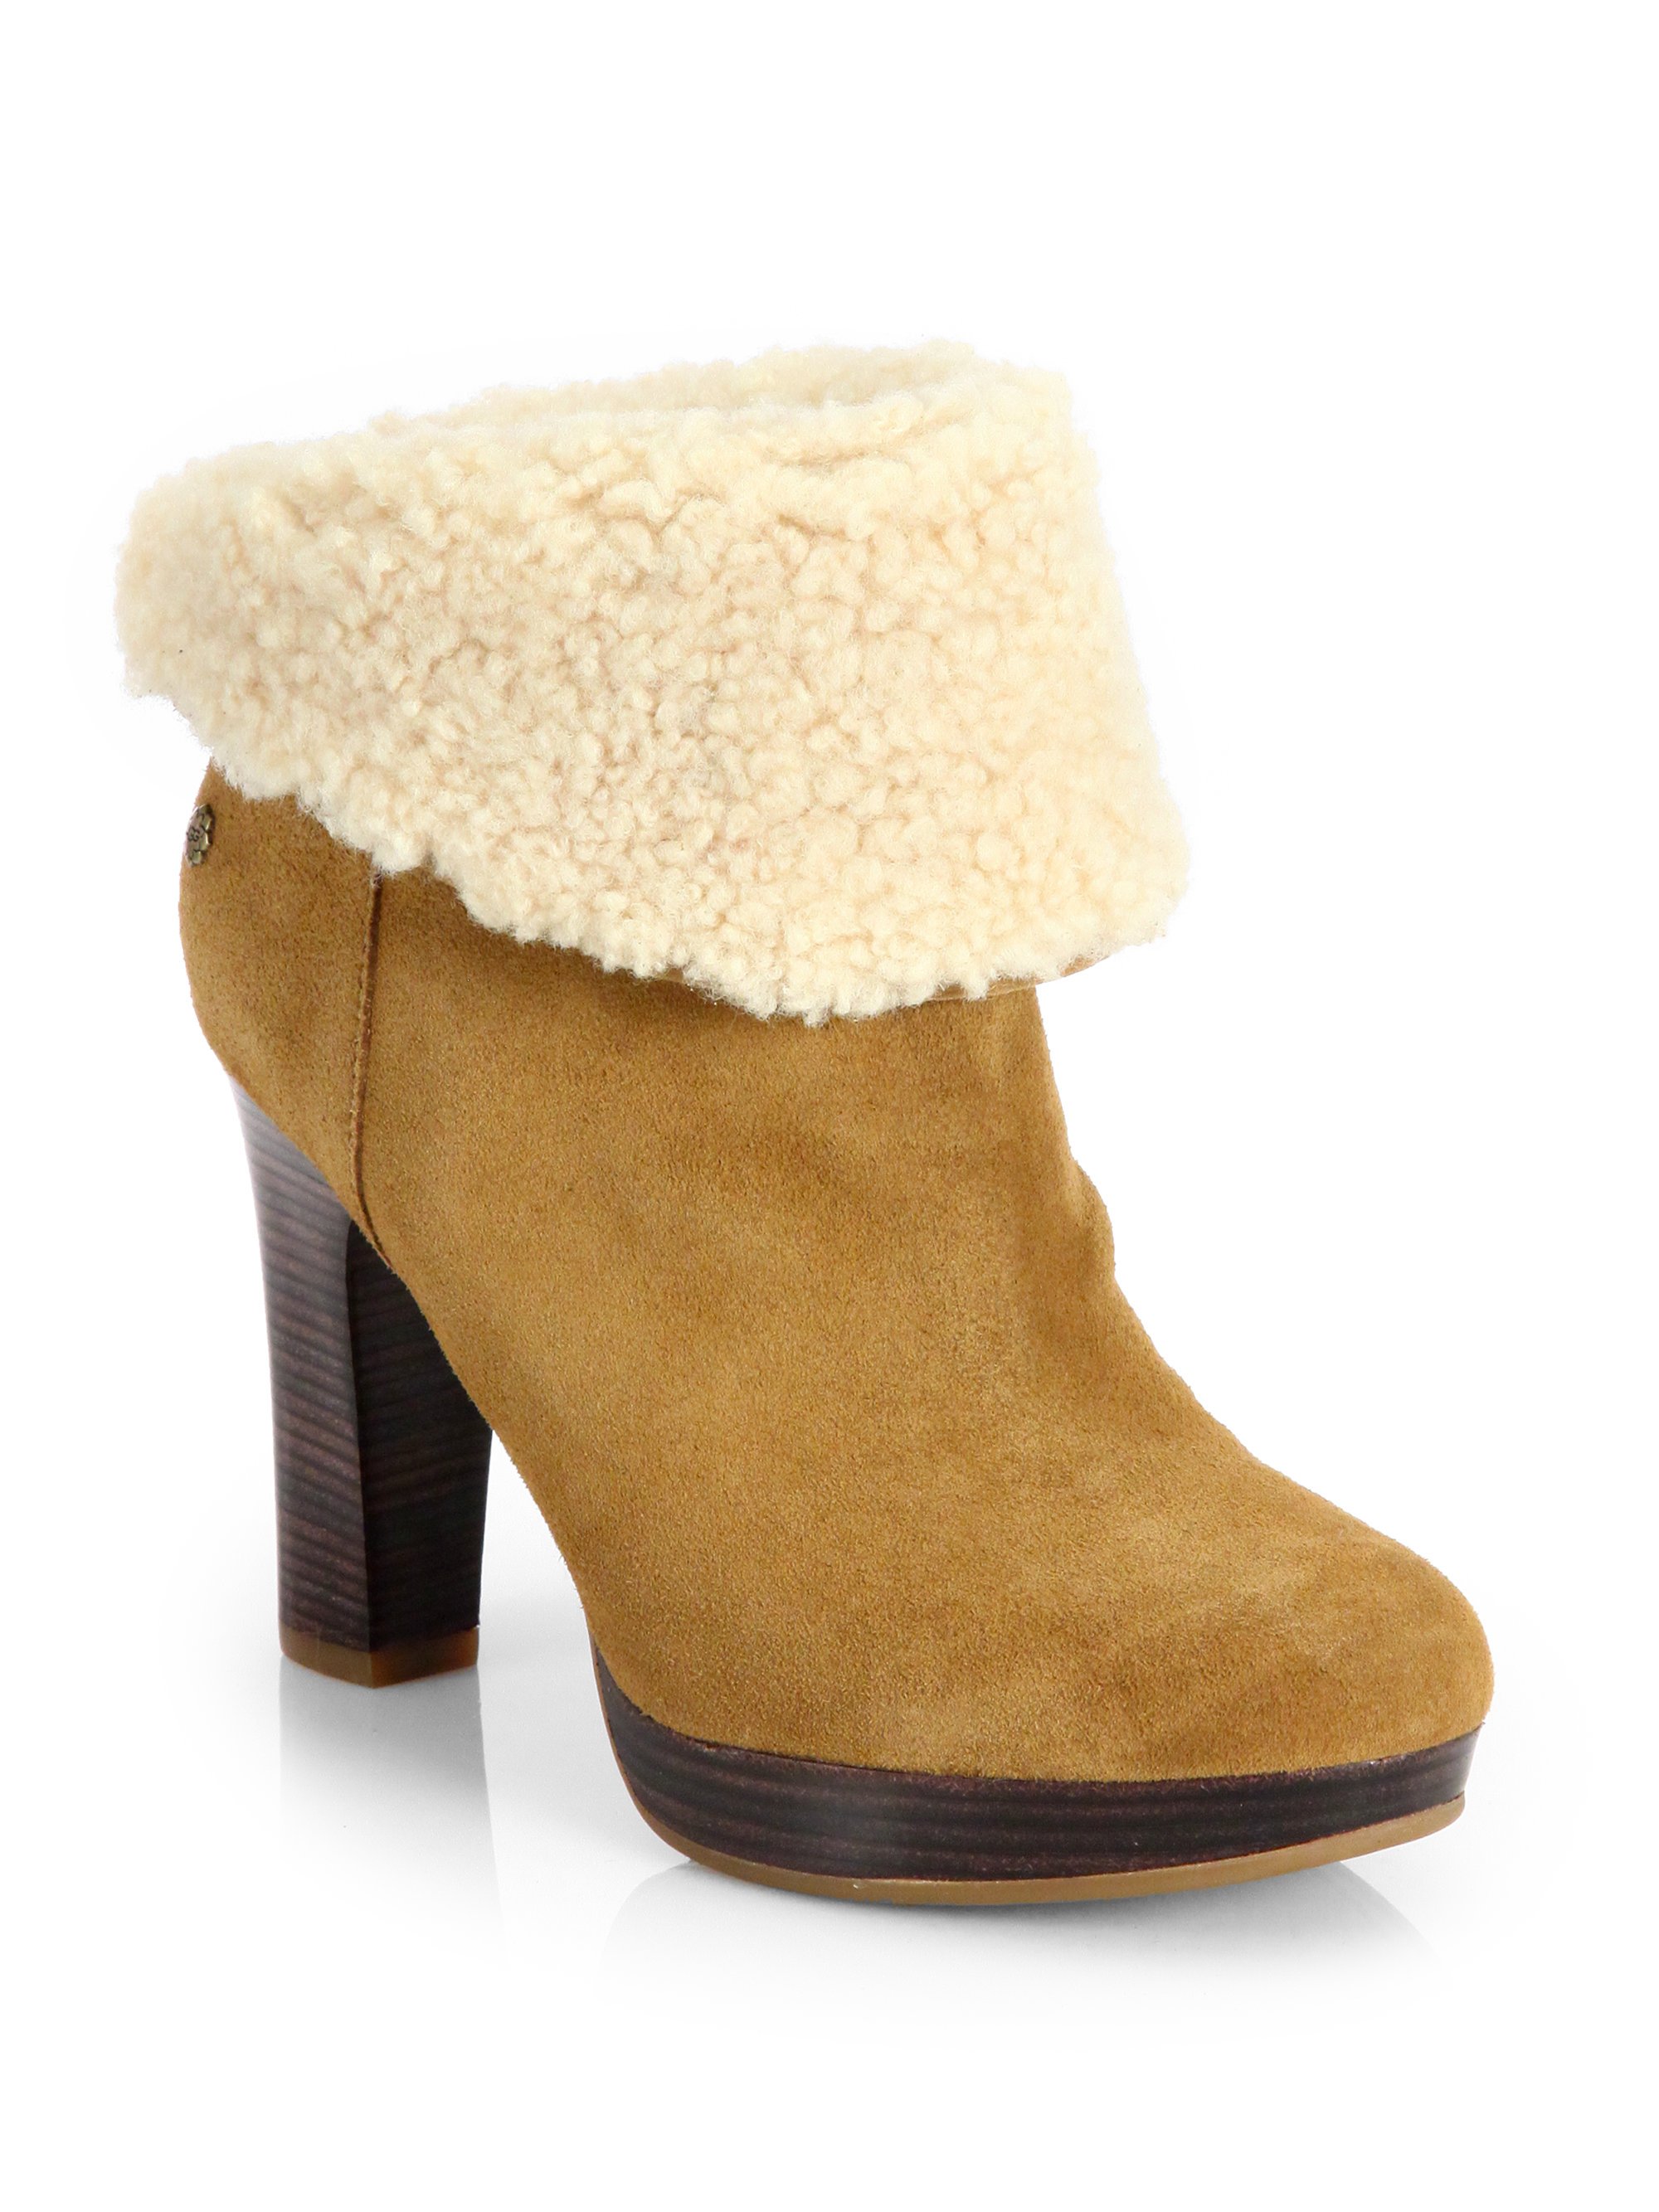 ugg boots that fold over